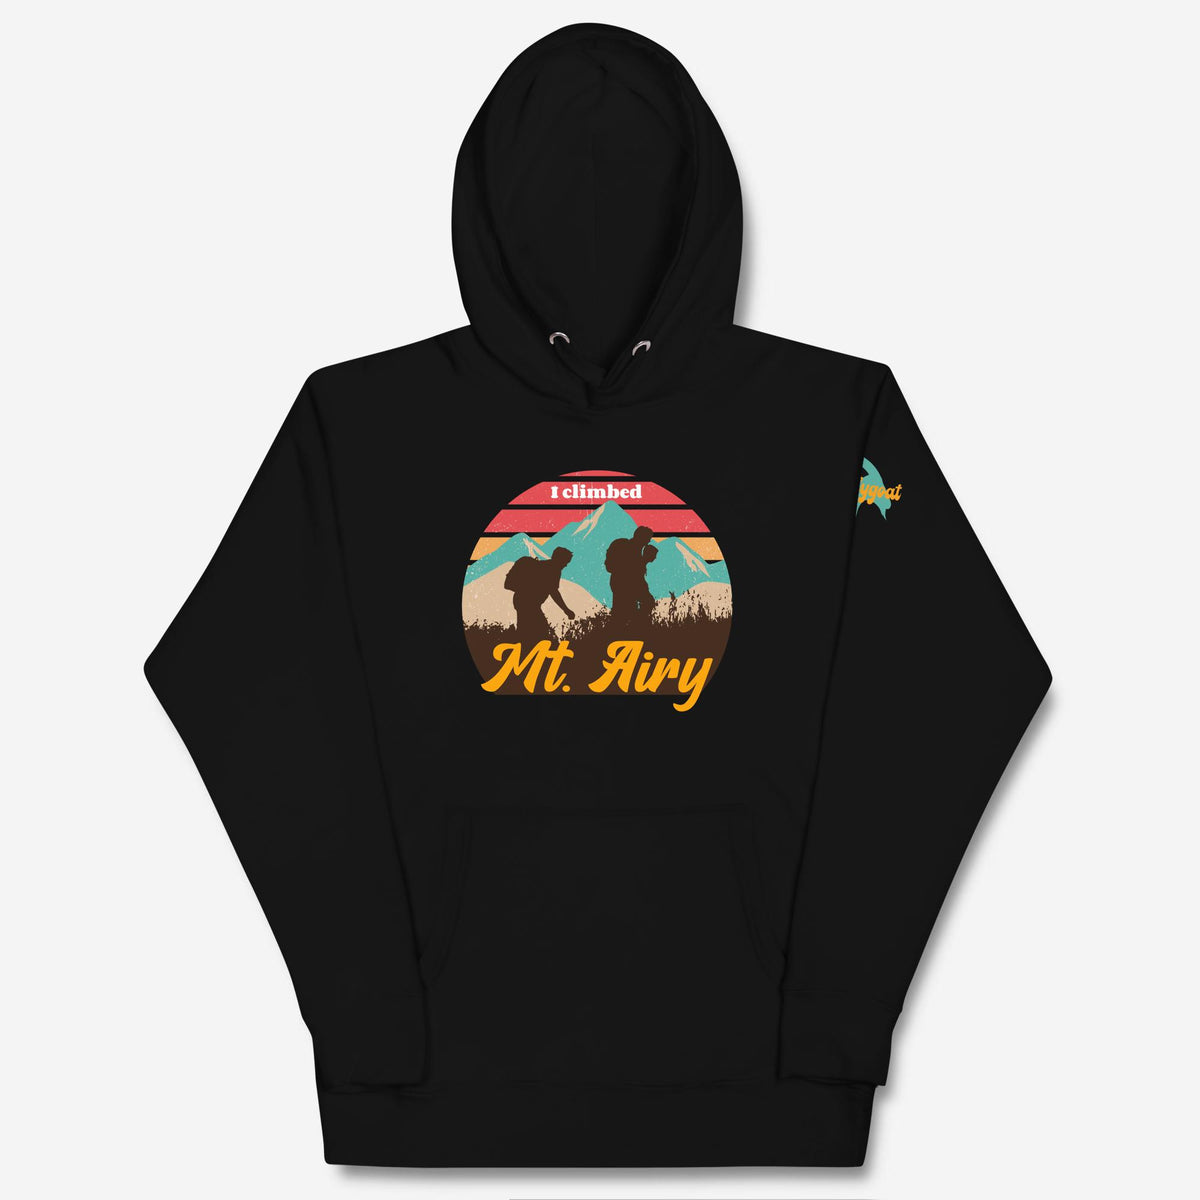 &quot;I Climbed Mt. Airy&quot; Hoodie